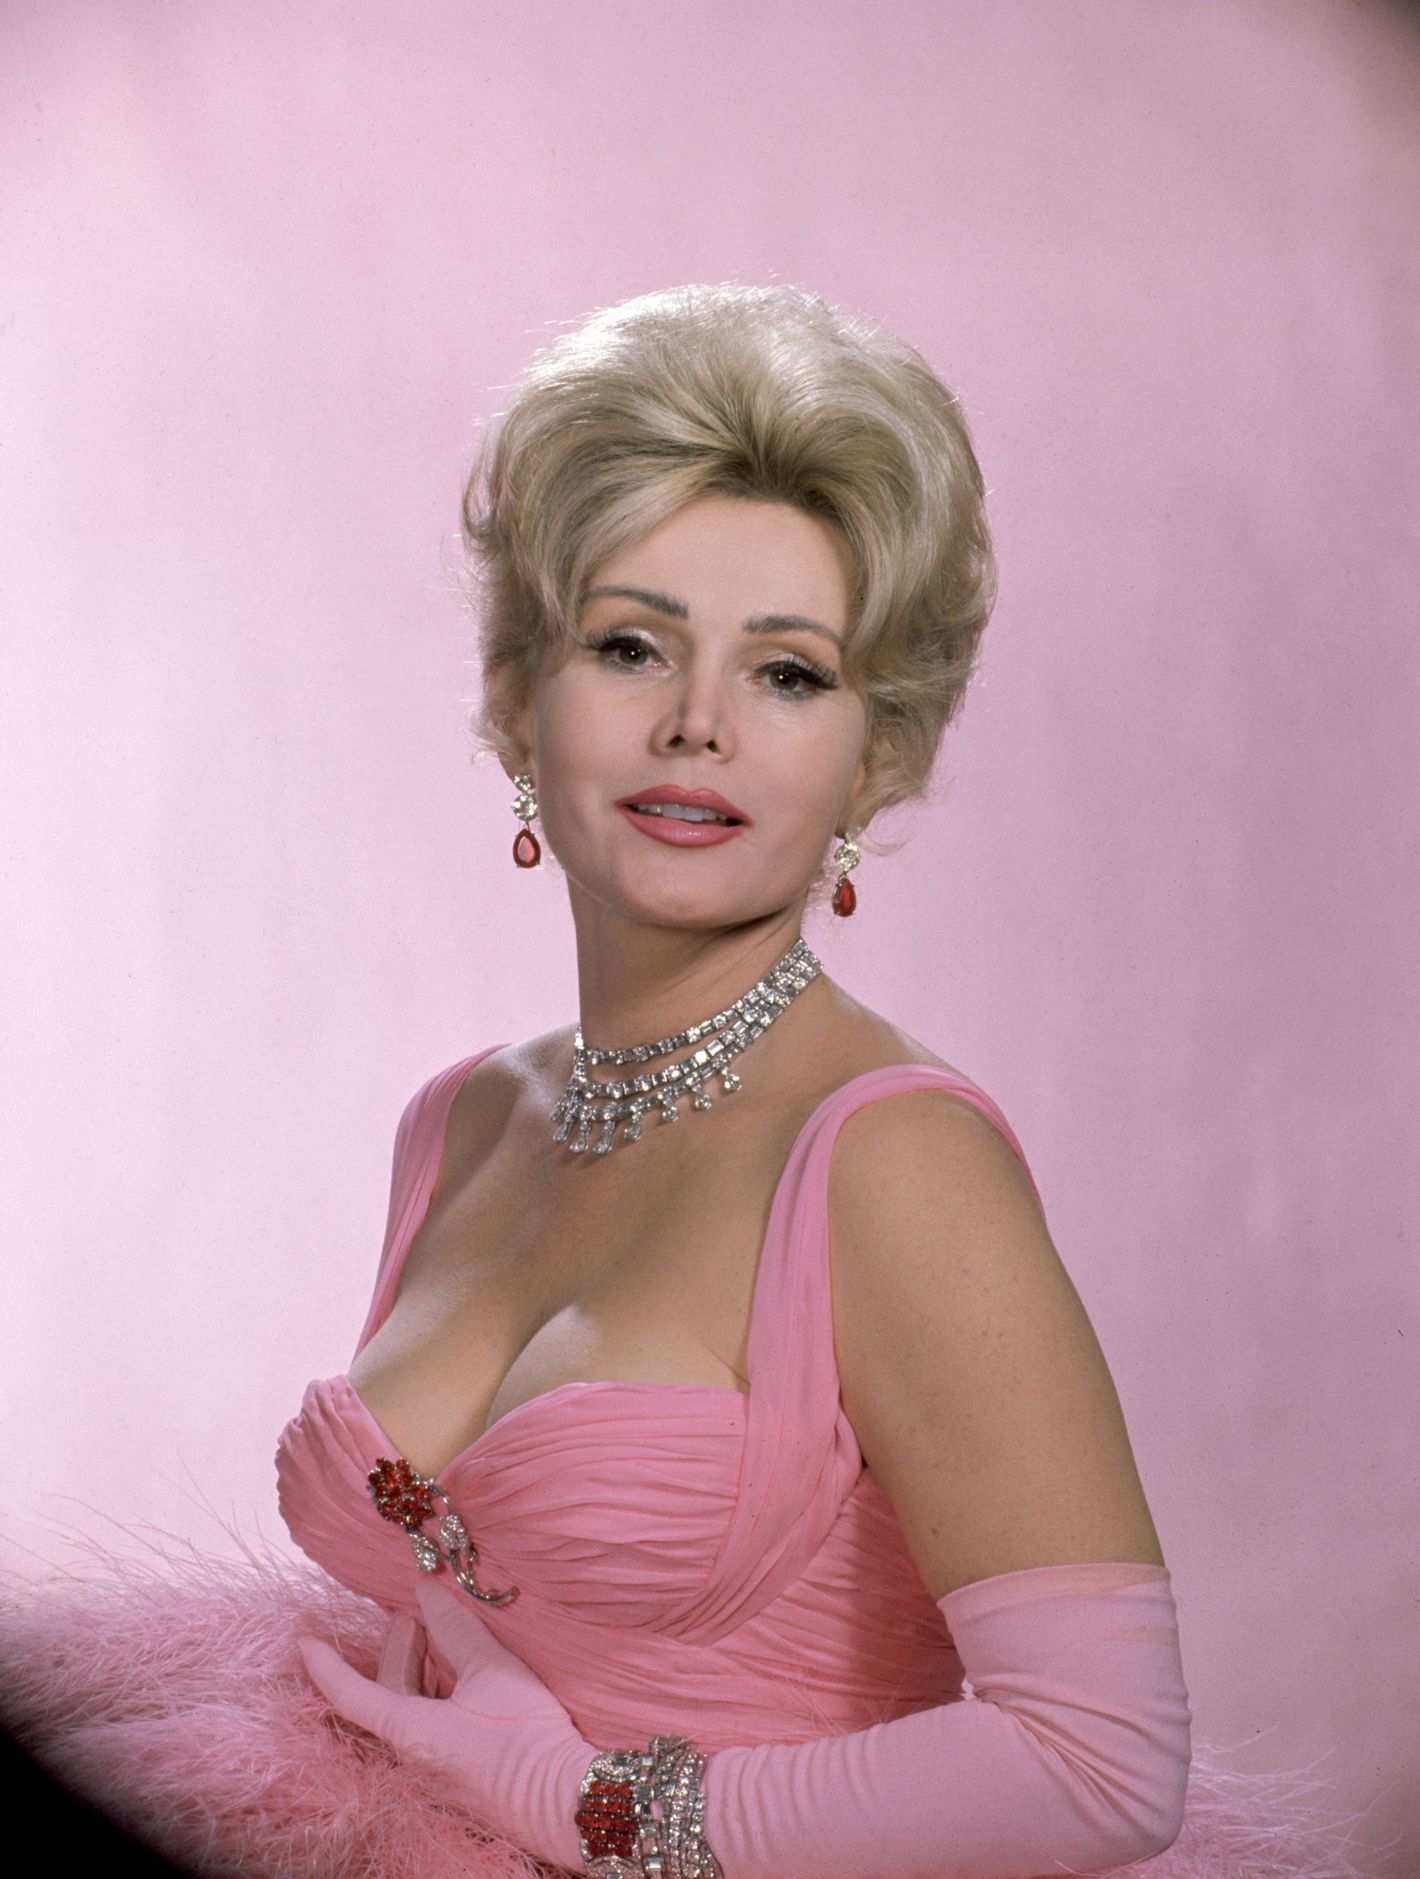 angeline maralit recommends eva gabor naked pic